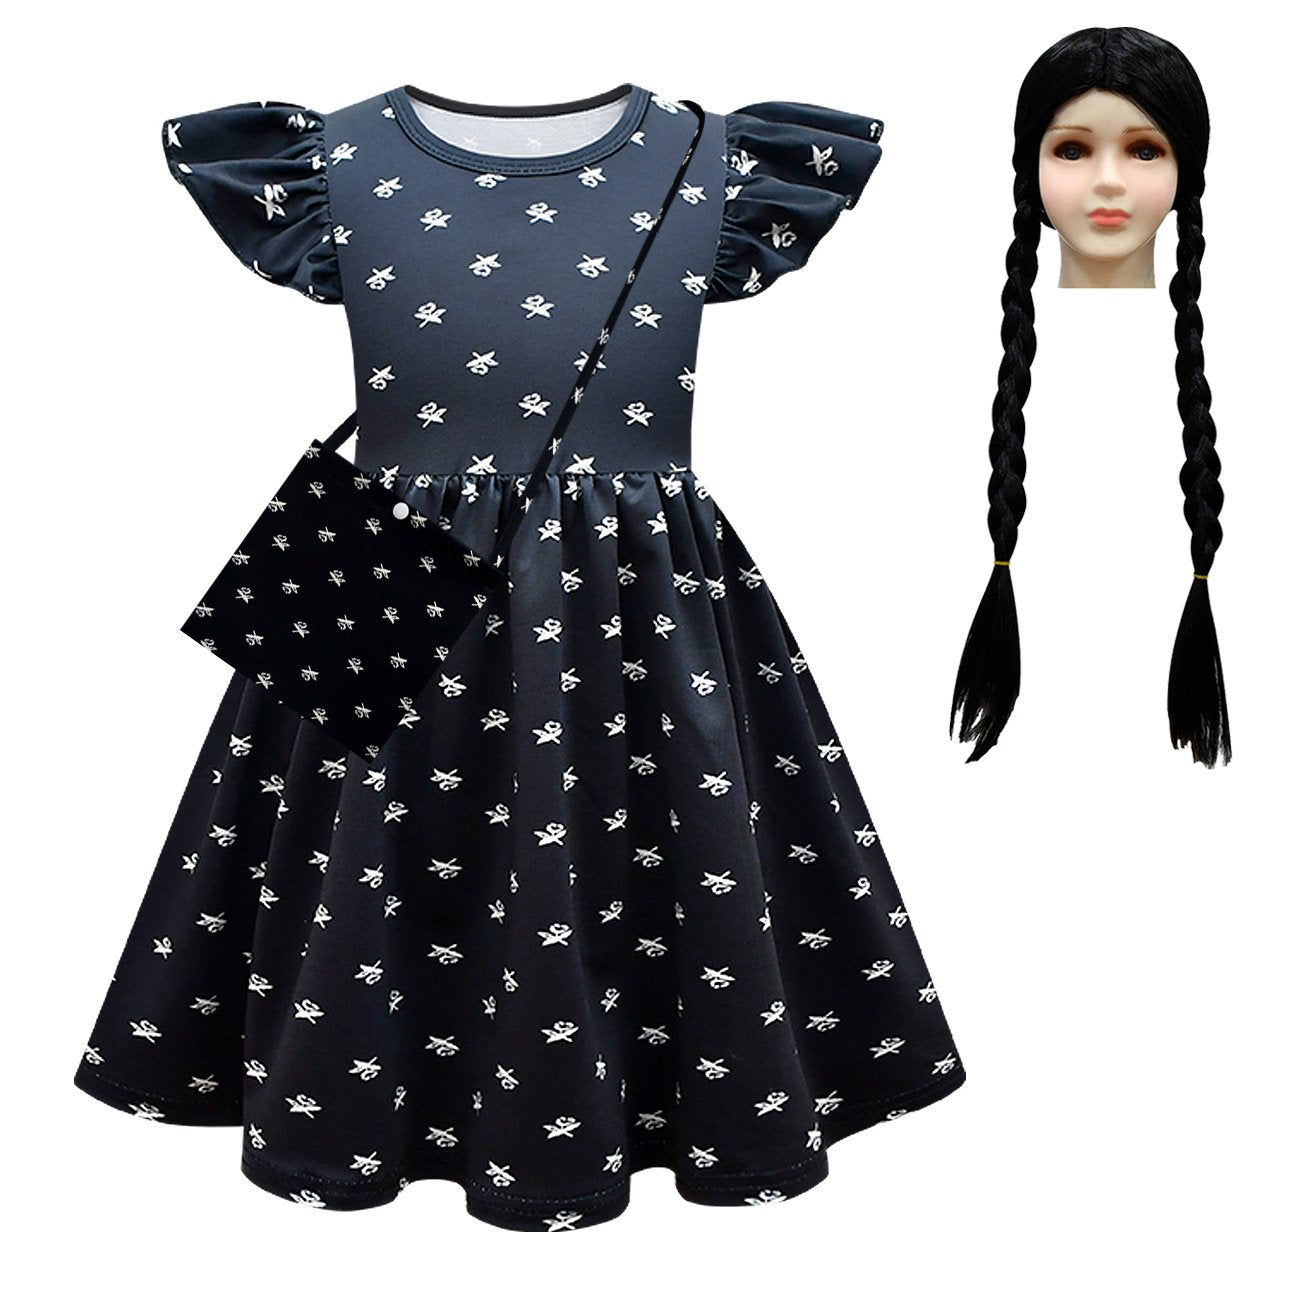 Wednesday Costume The Addams Family Cosplay Flying Sleeve Printed Dress For Kids